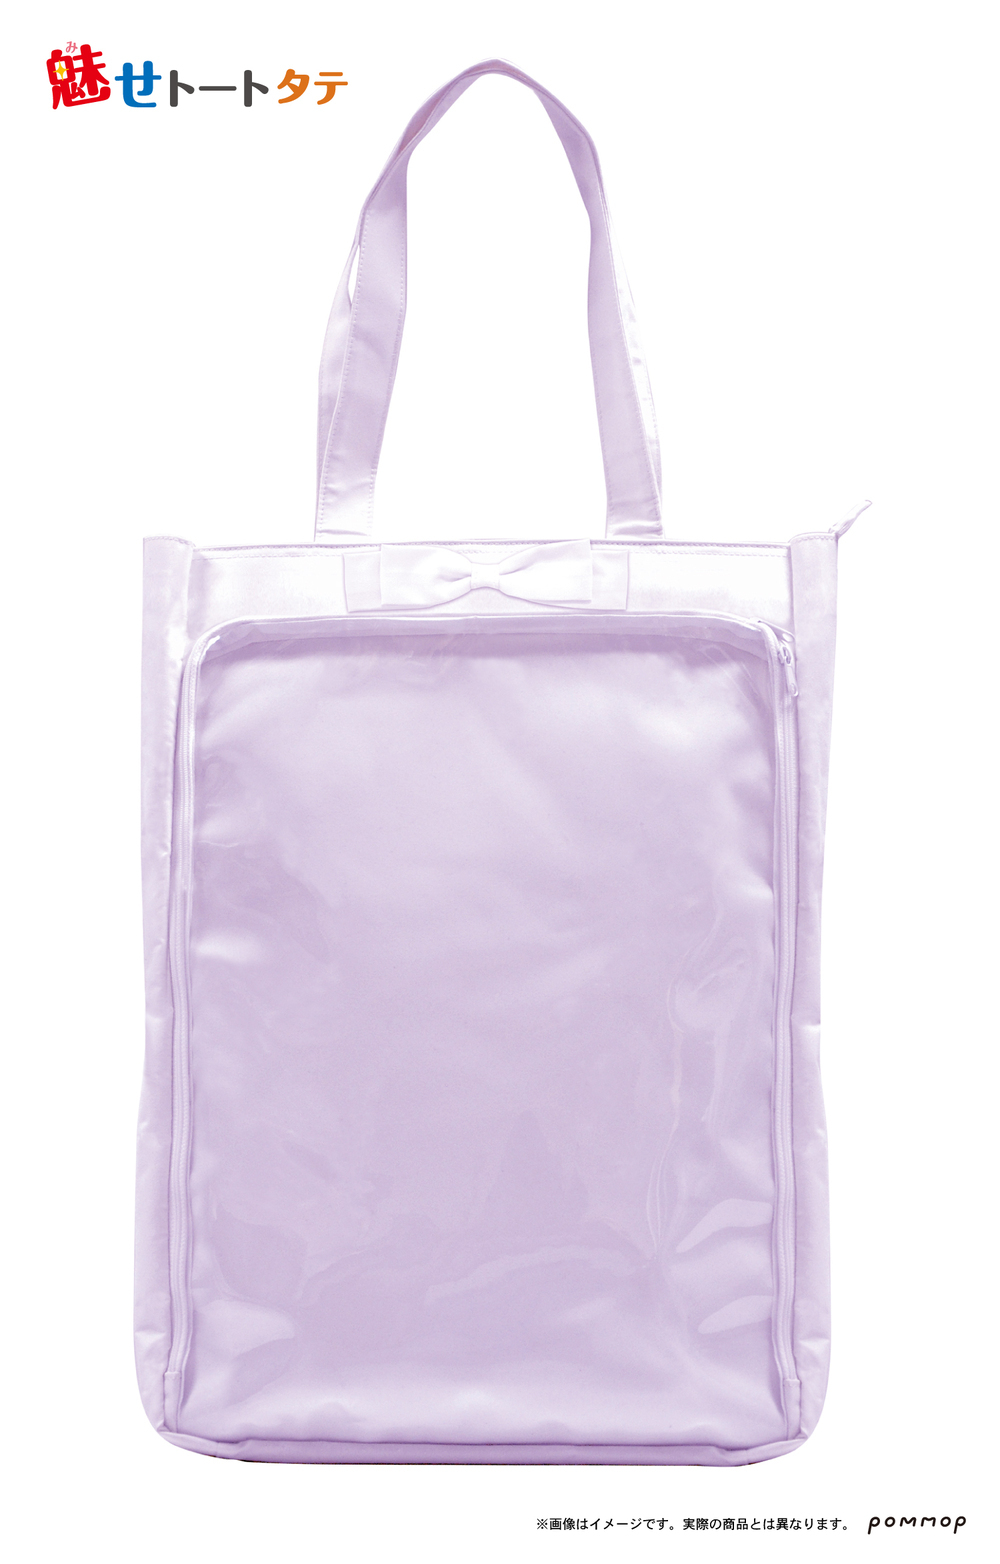 Mise Tote Bag Vertical E Lavender 魅せトート タテ E ラベンダー Anime Goods Bags Accessories